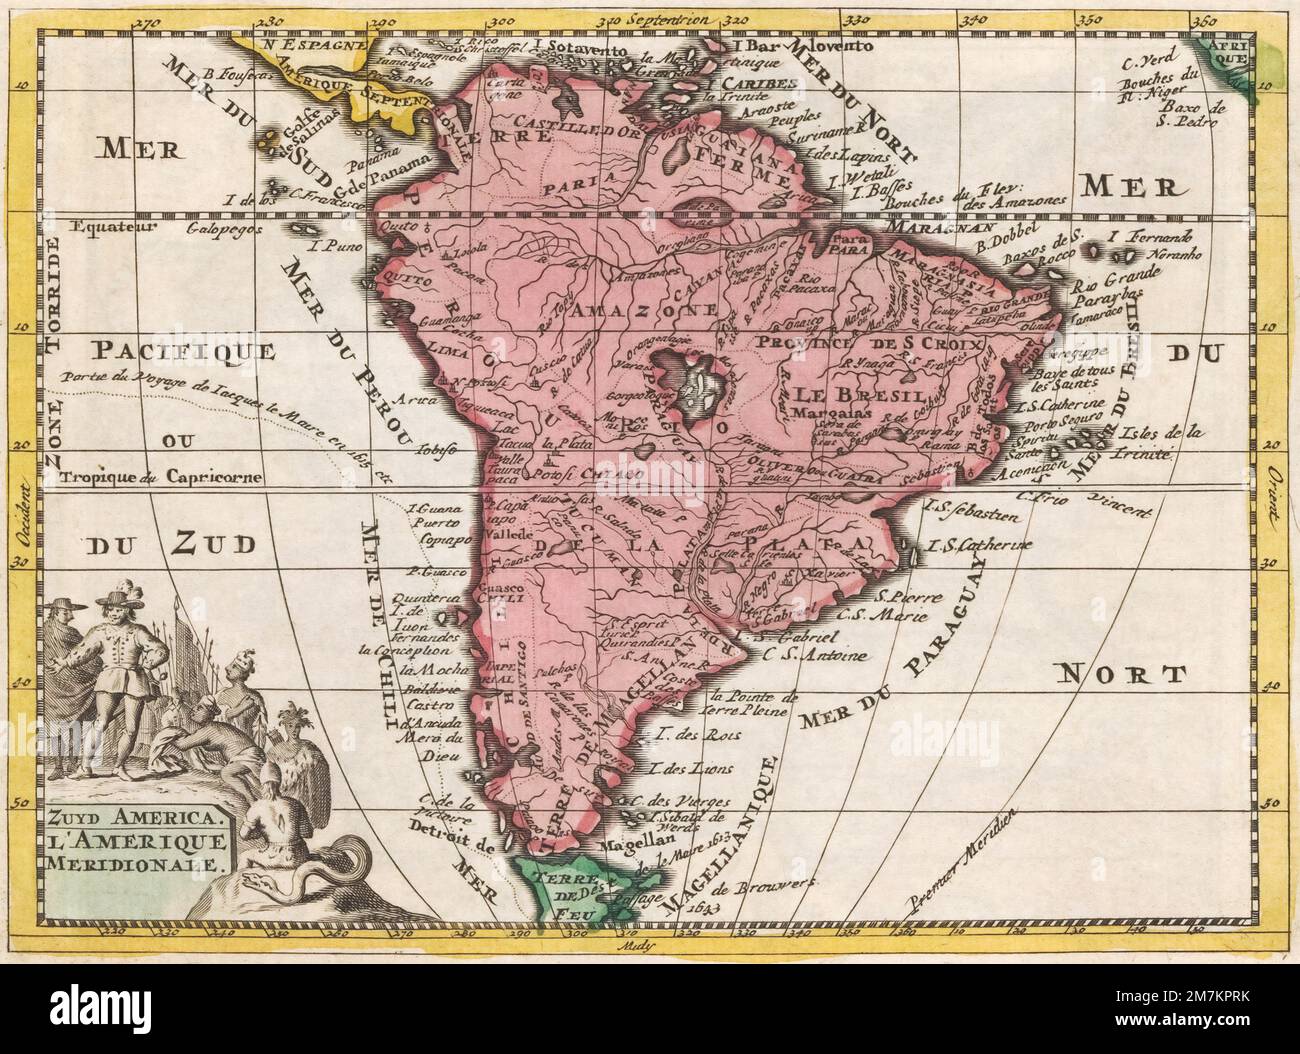 A map of South America from the early 18th century by an anonymous cartographer. Stock Photo